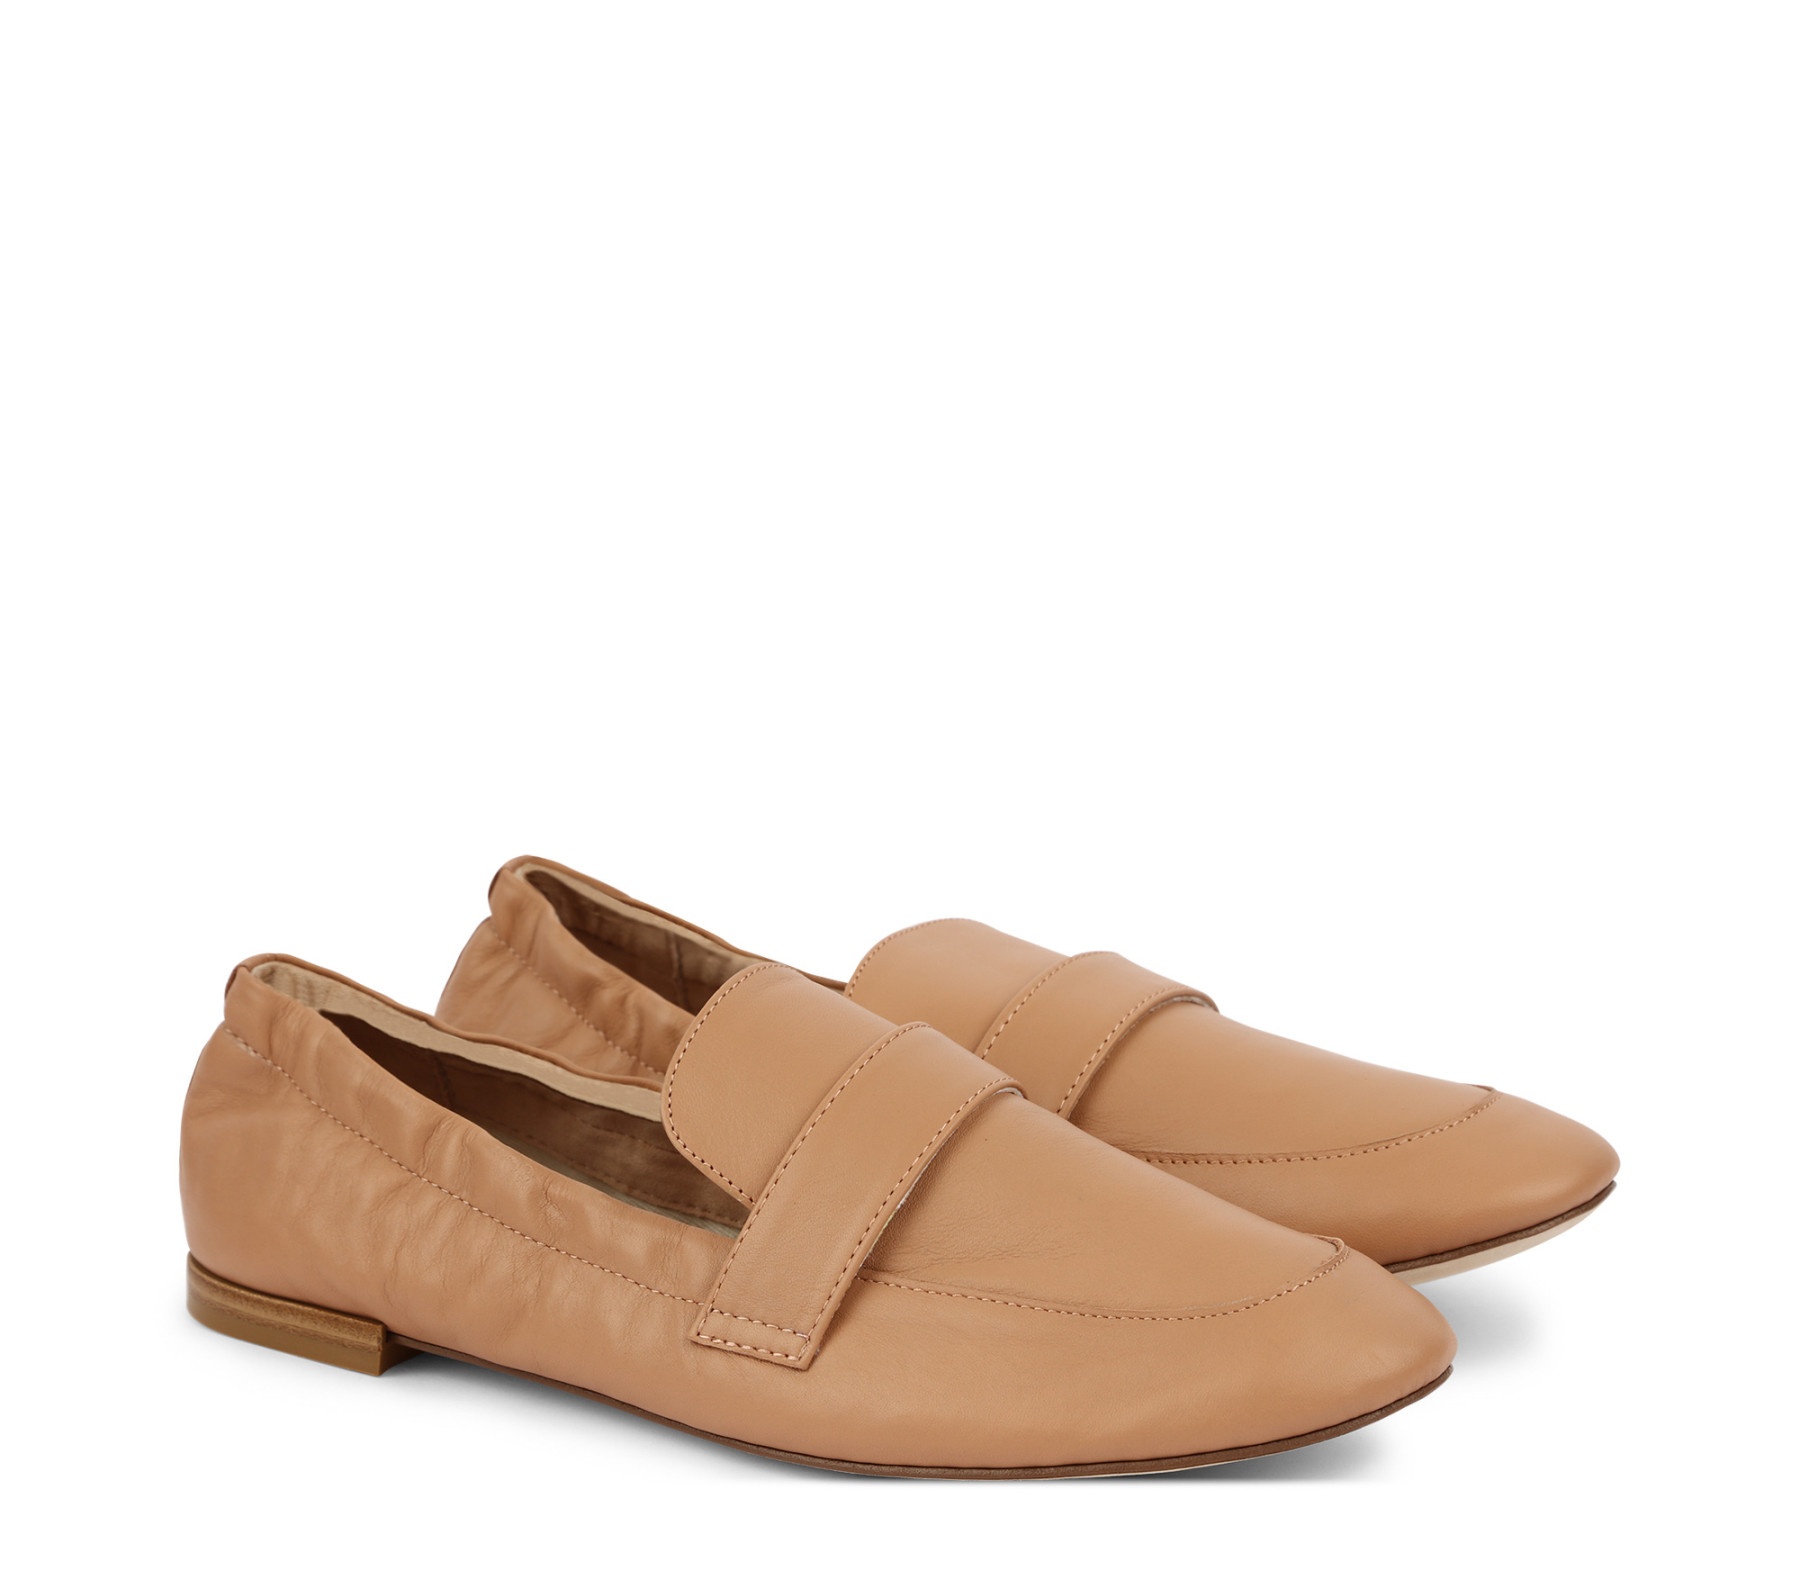 Repetto Tanguy loafers | REVERSIBLE